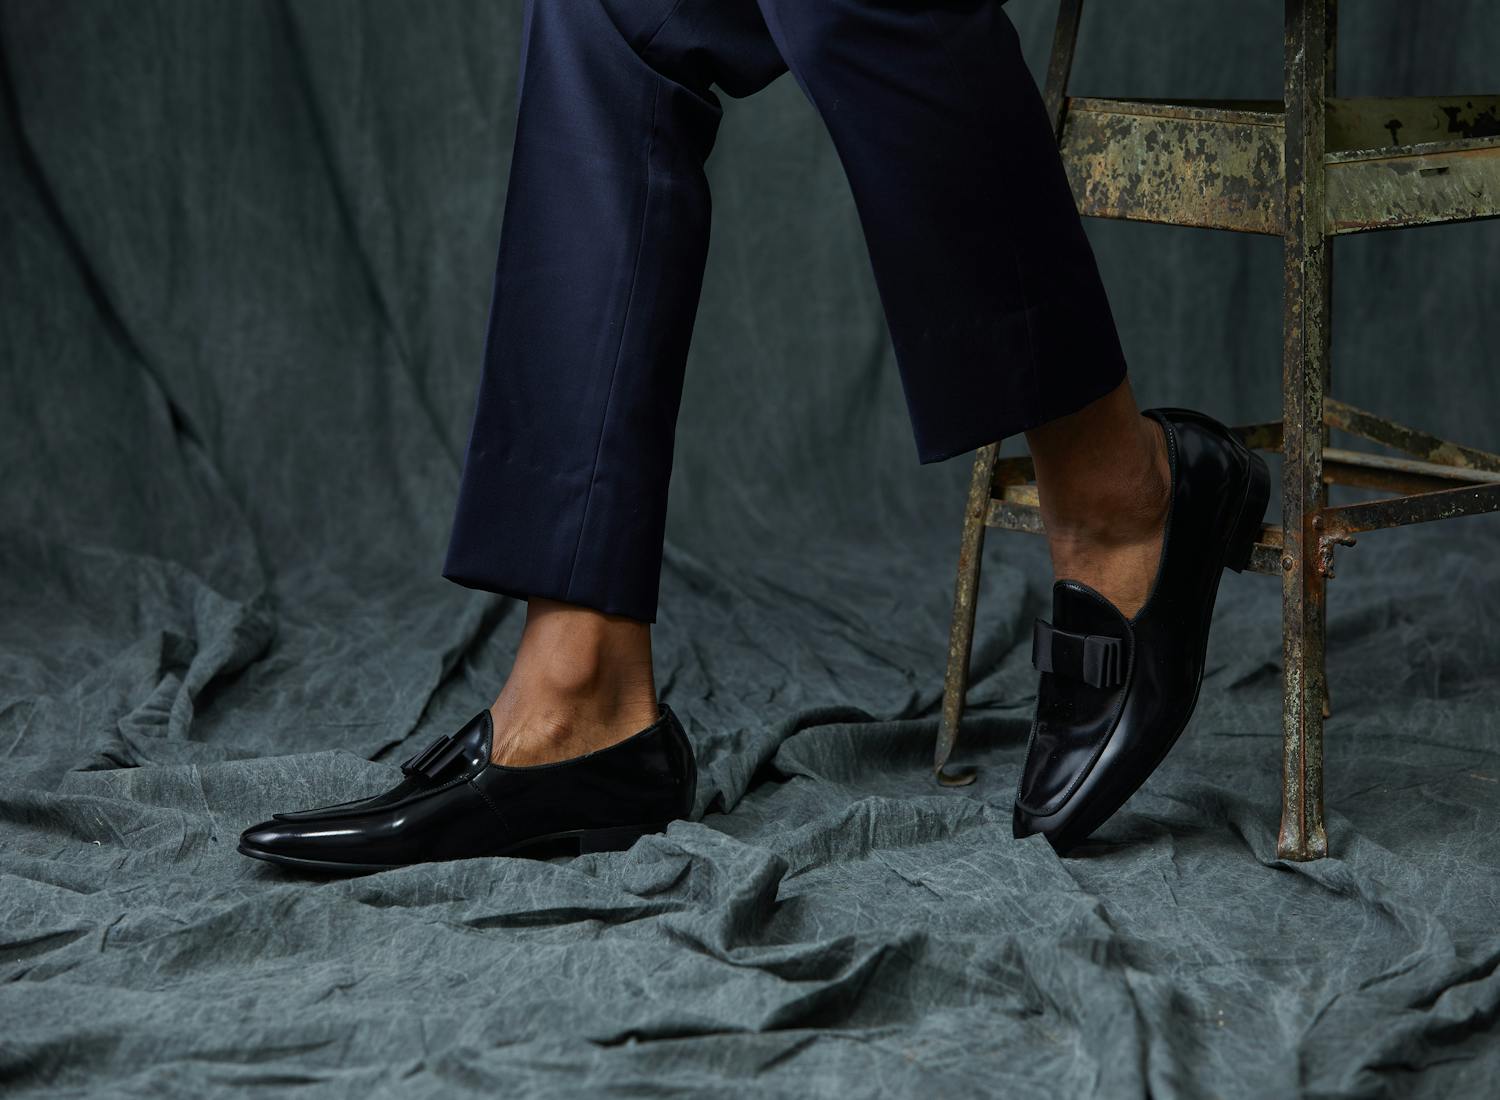 20 Best Shoes to Wear With a Tuxedo 2023 - Formal Tux Shoe Styles